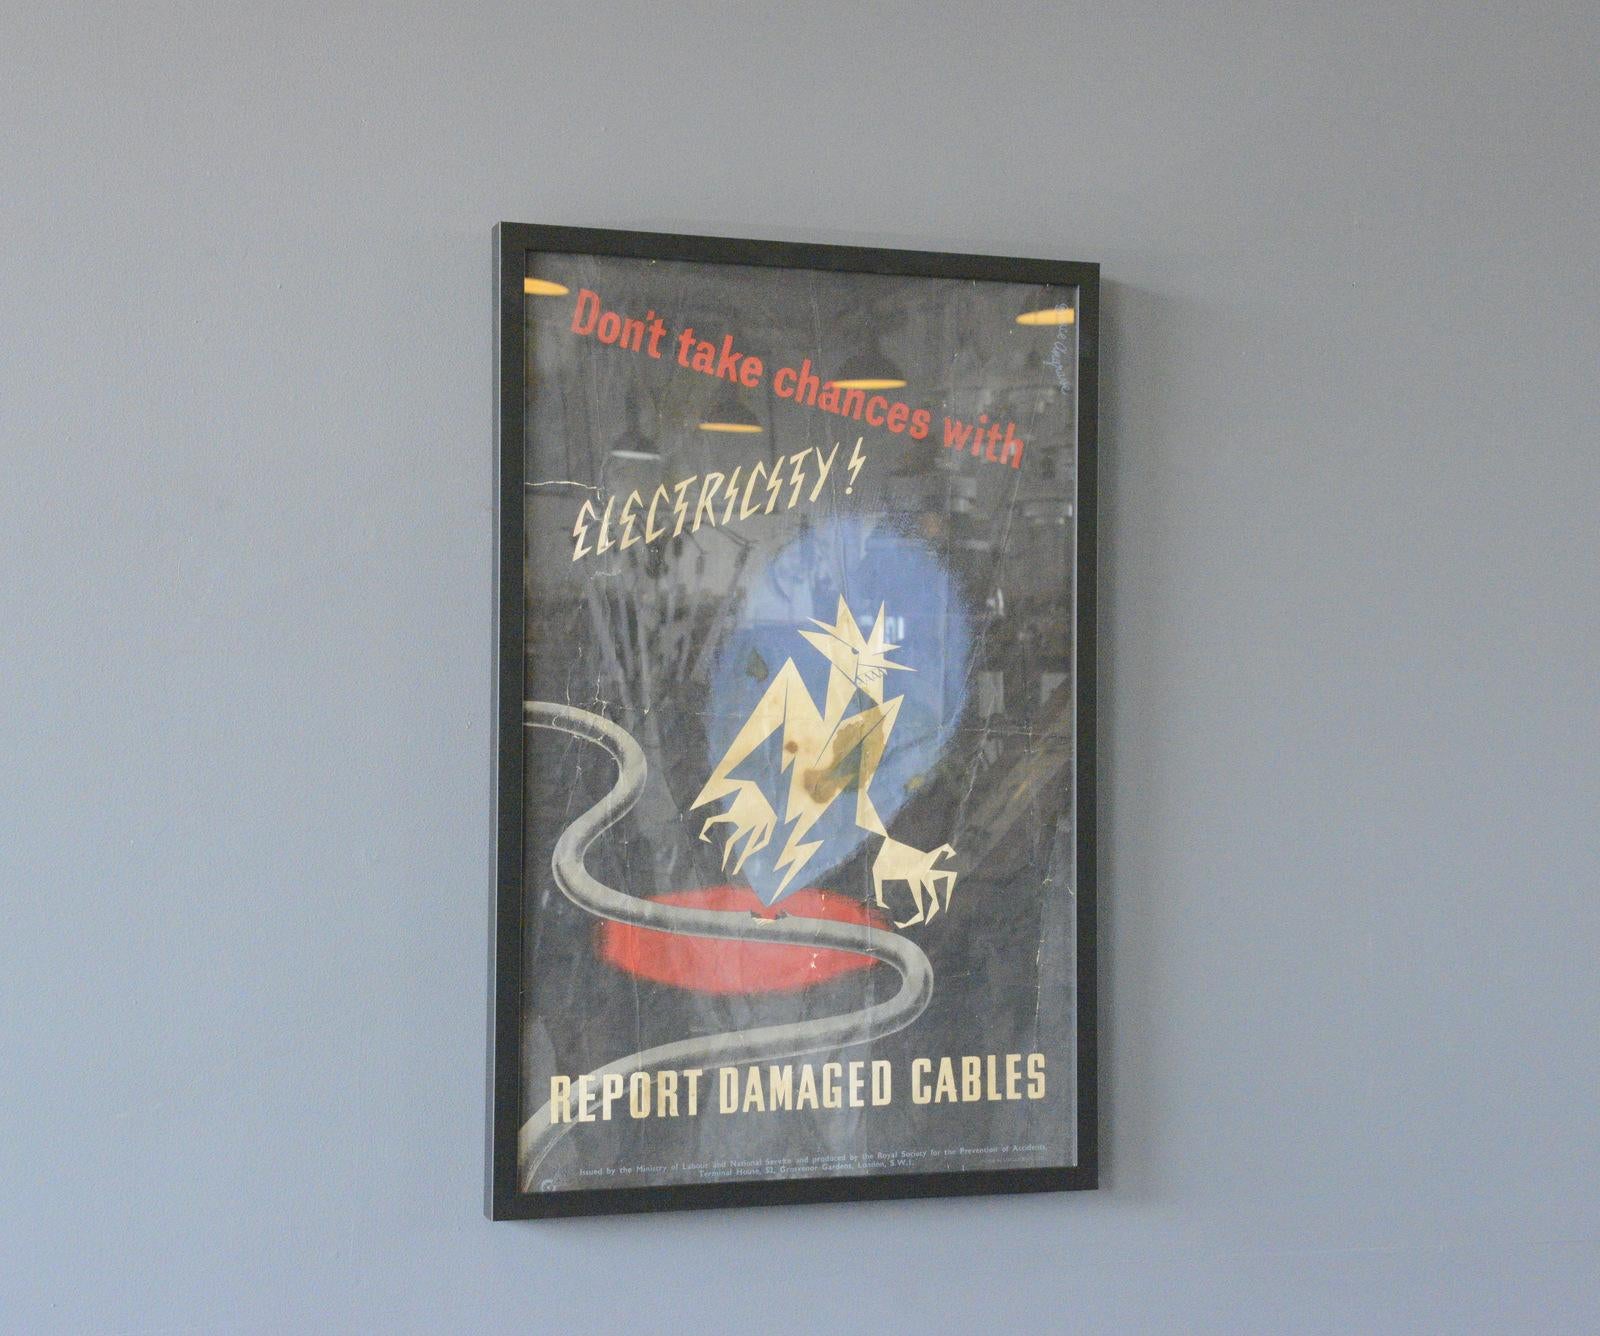 WW2 Factory Safety Poster Circa 1940s

- Original litho poster
- Designed by Bruce Angrave
- Framed in a black wooden frame with glass 
- English ~ 1940s
- 52cm wide x 78.5cm tall

Bruce Angrave

Bruce Angrave (1914 - 1983) was a Leicester-born